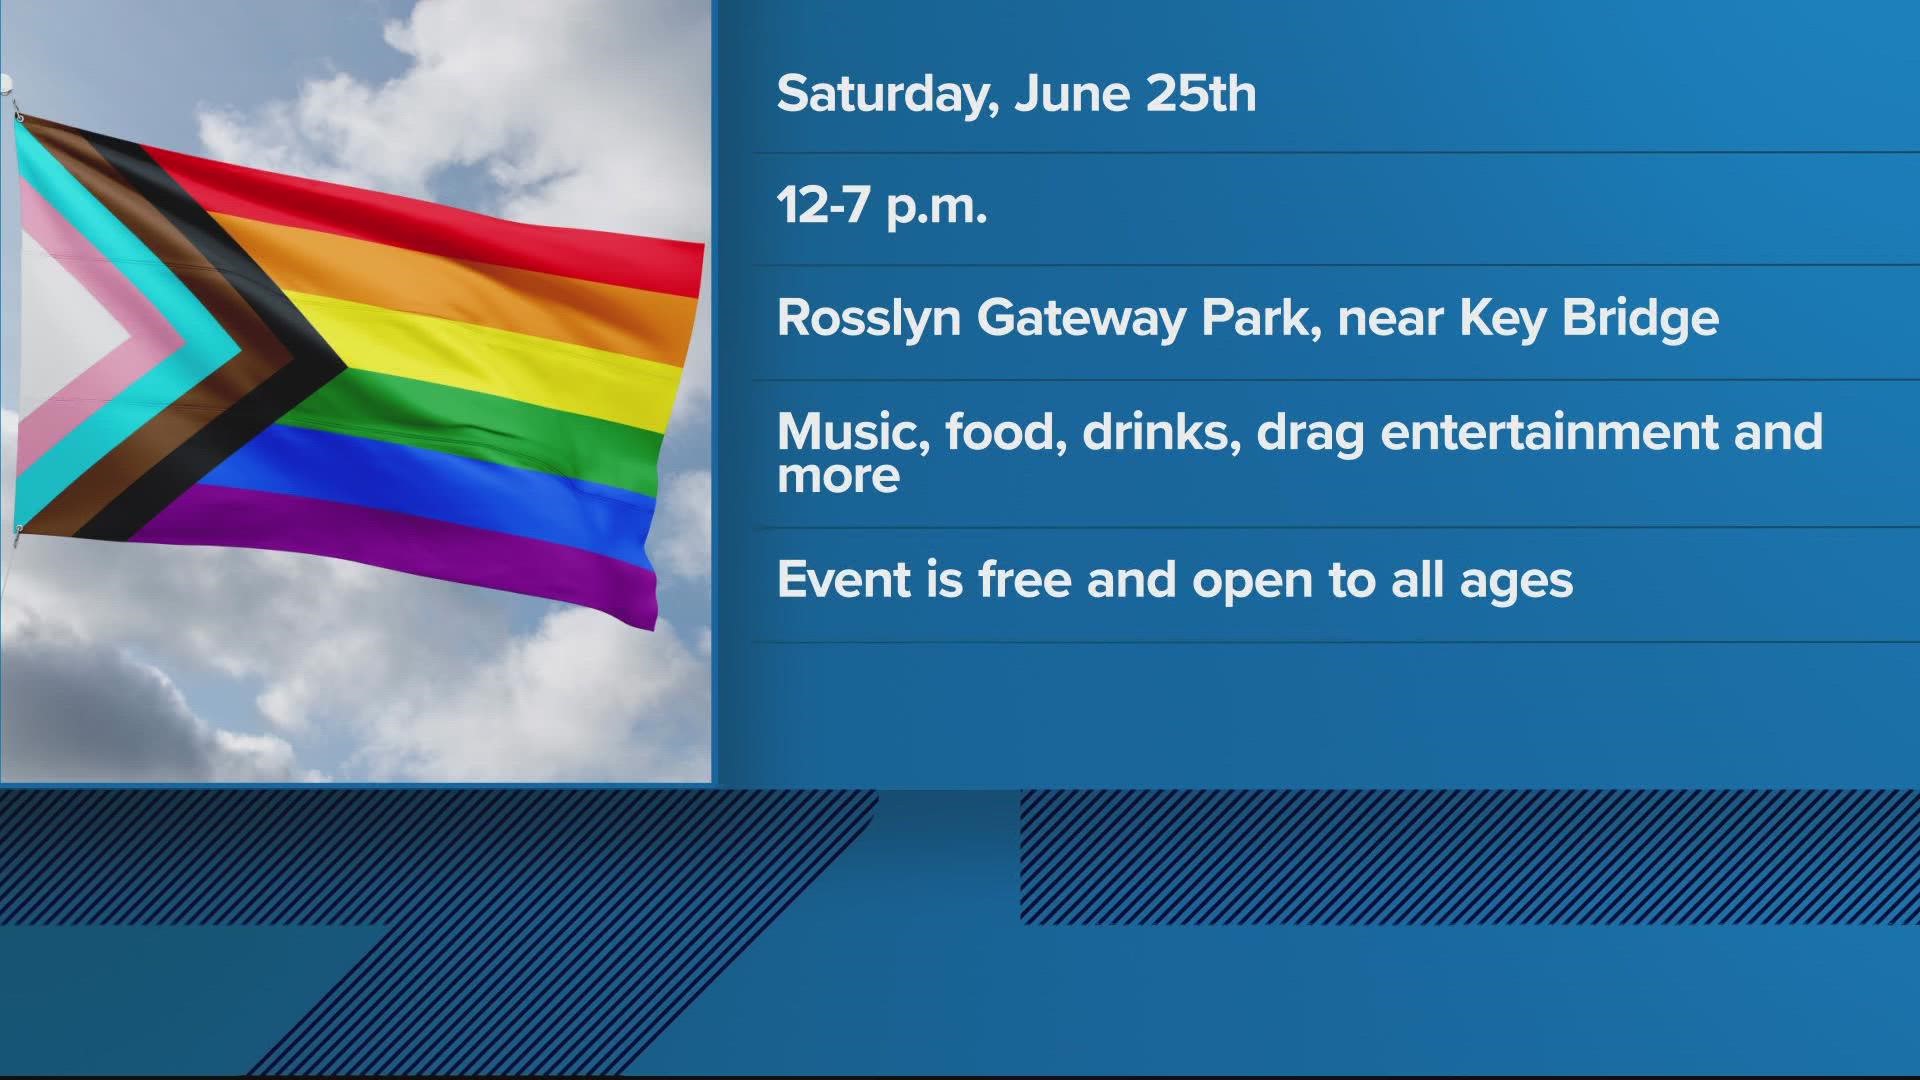 Arlington has held Pride events before, but this is its first full-scale festival.